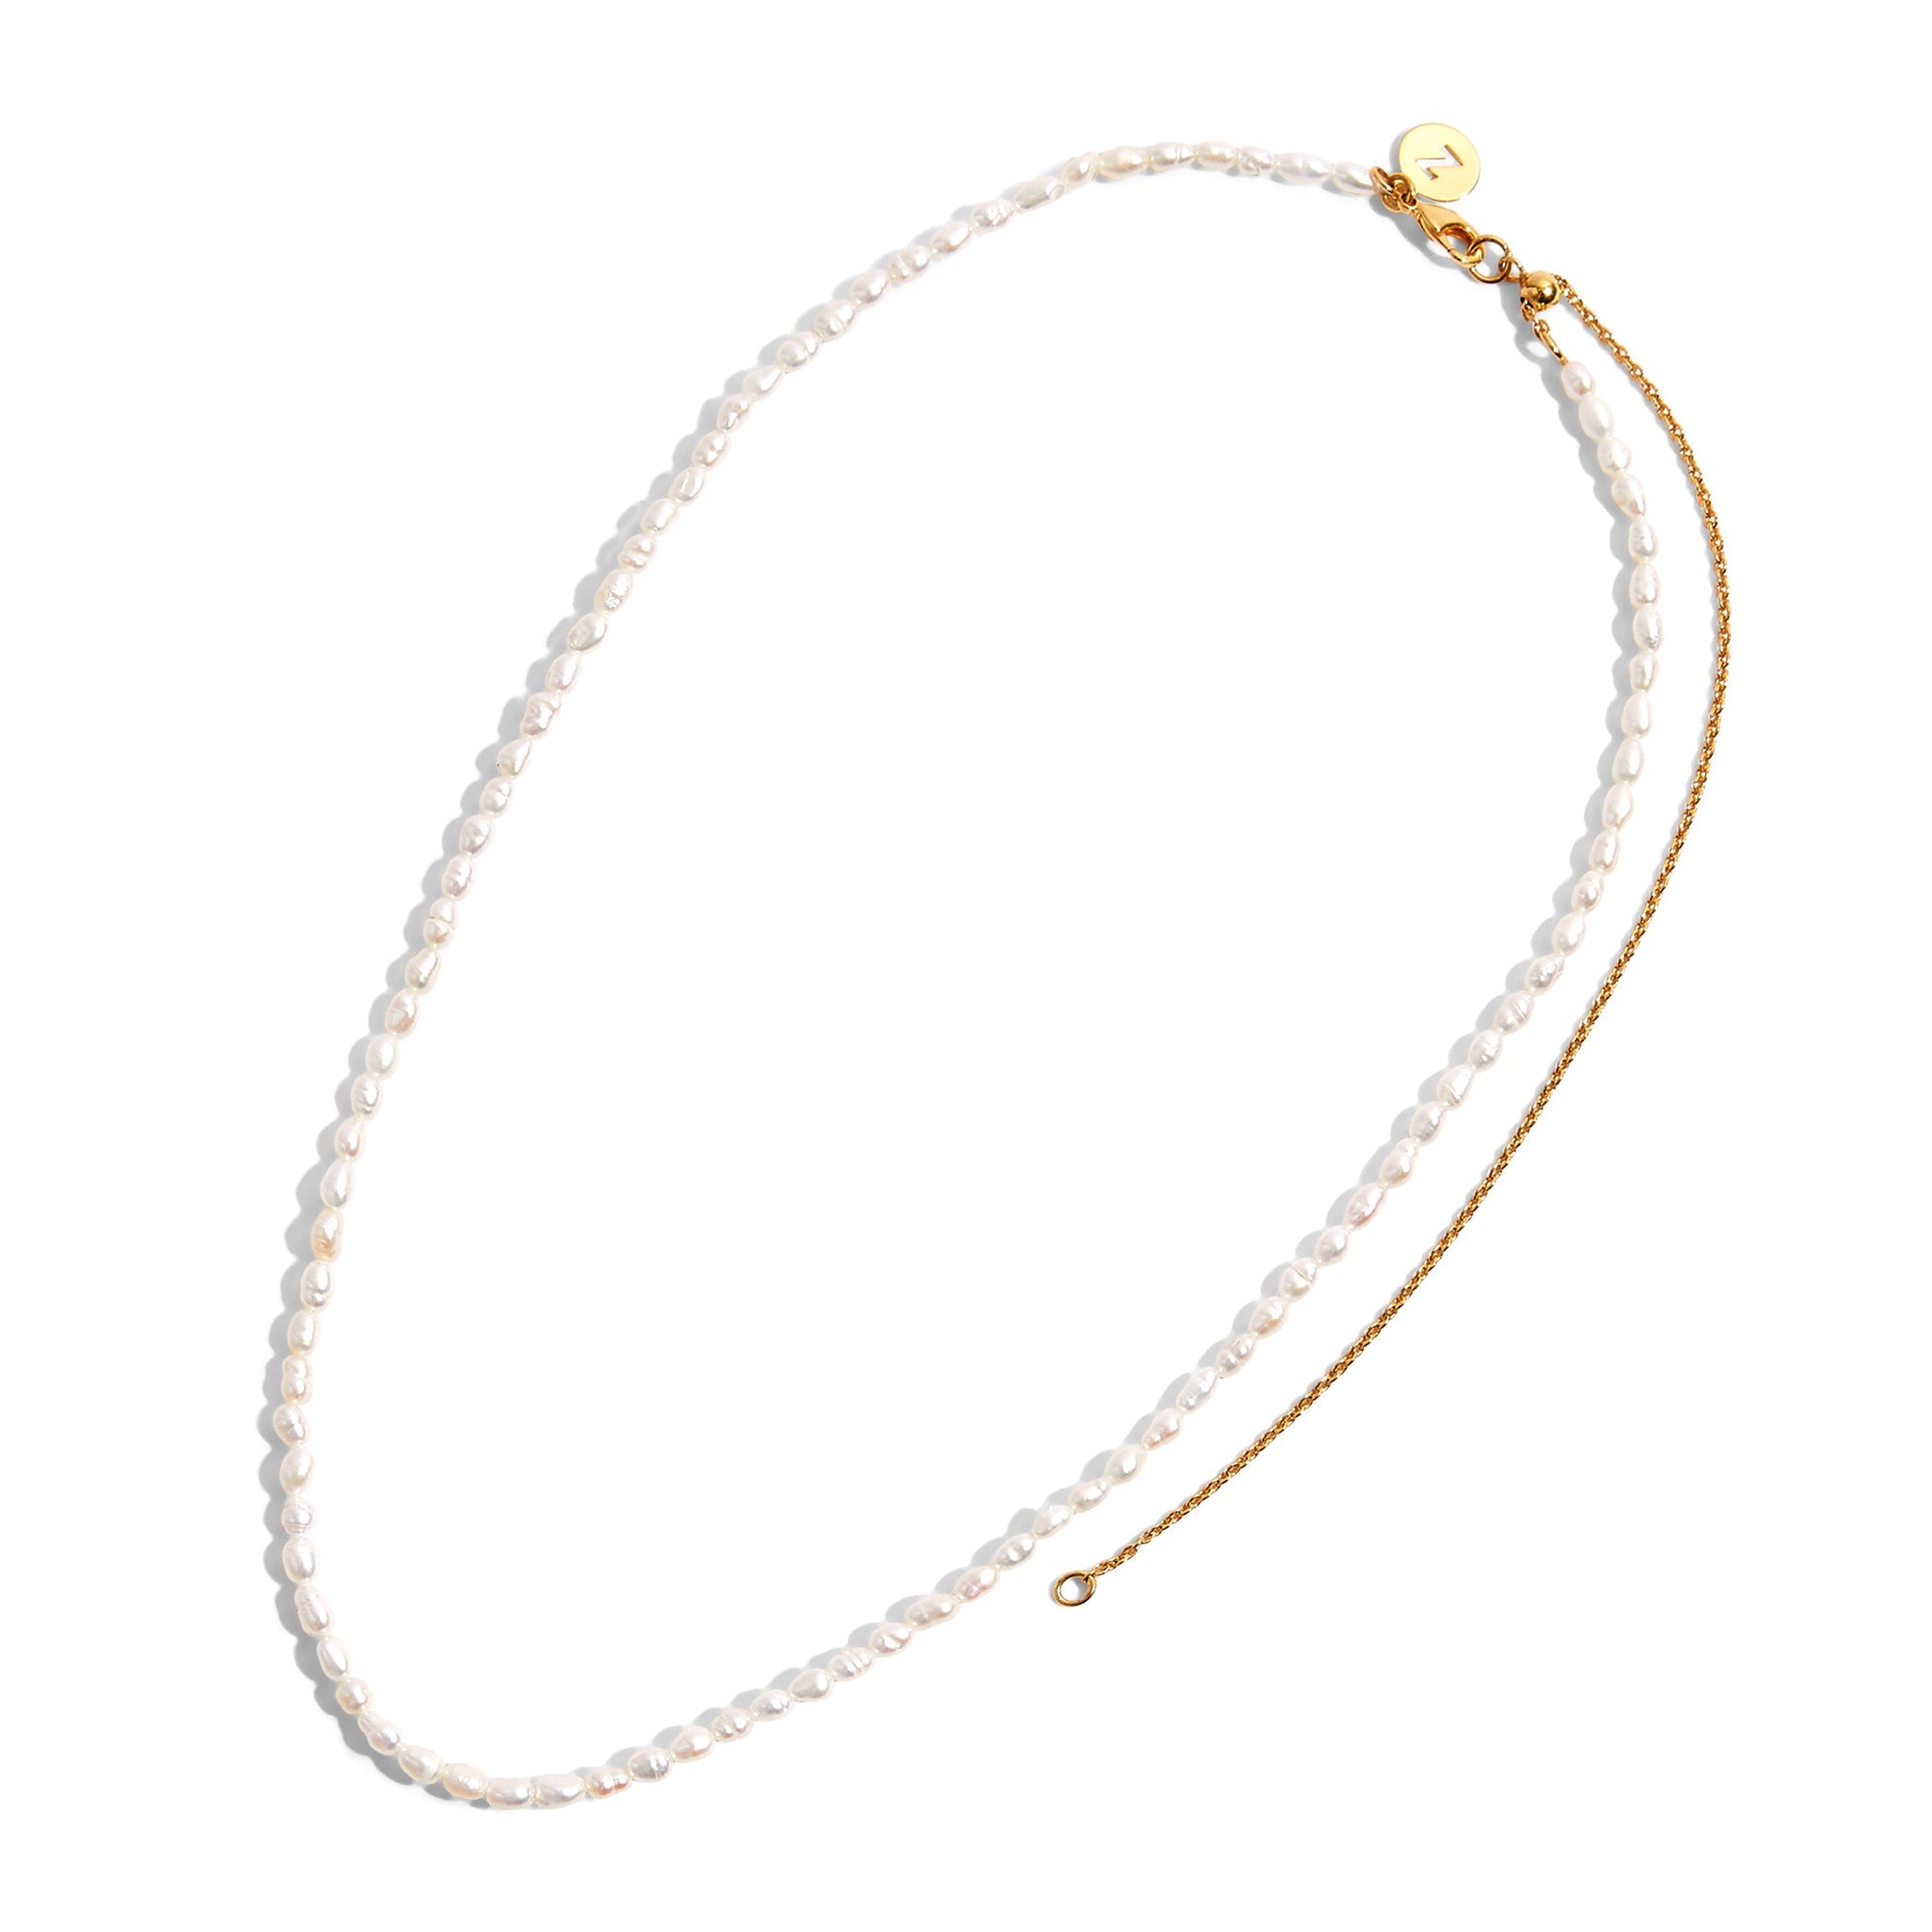 Real Gold Plated Z Seed Pearl Necklace For Women By Accessorize London